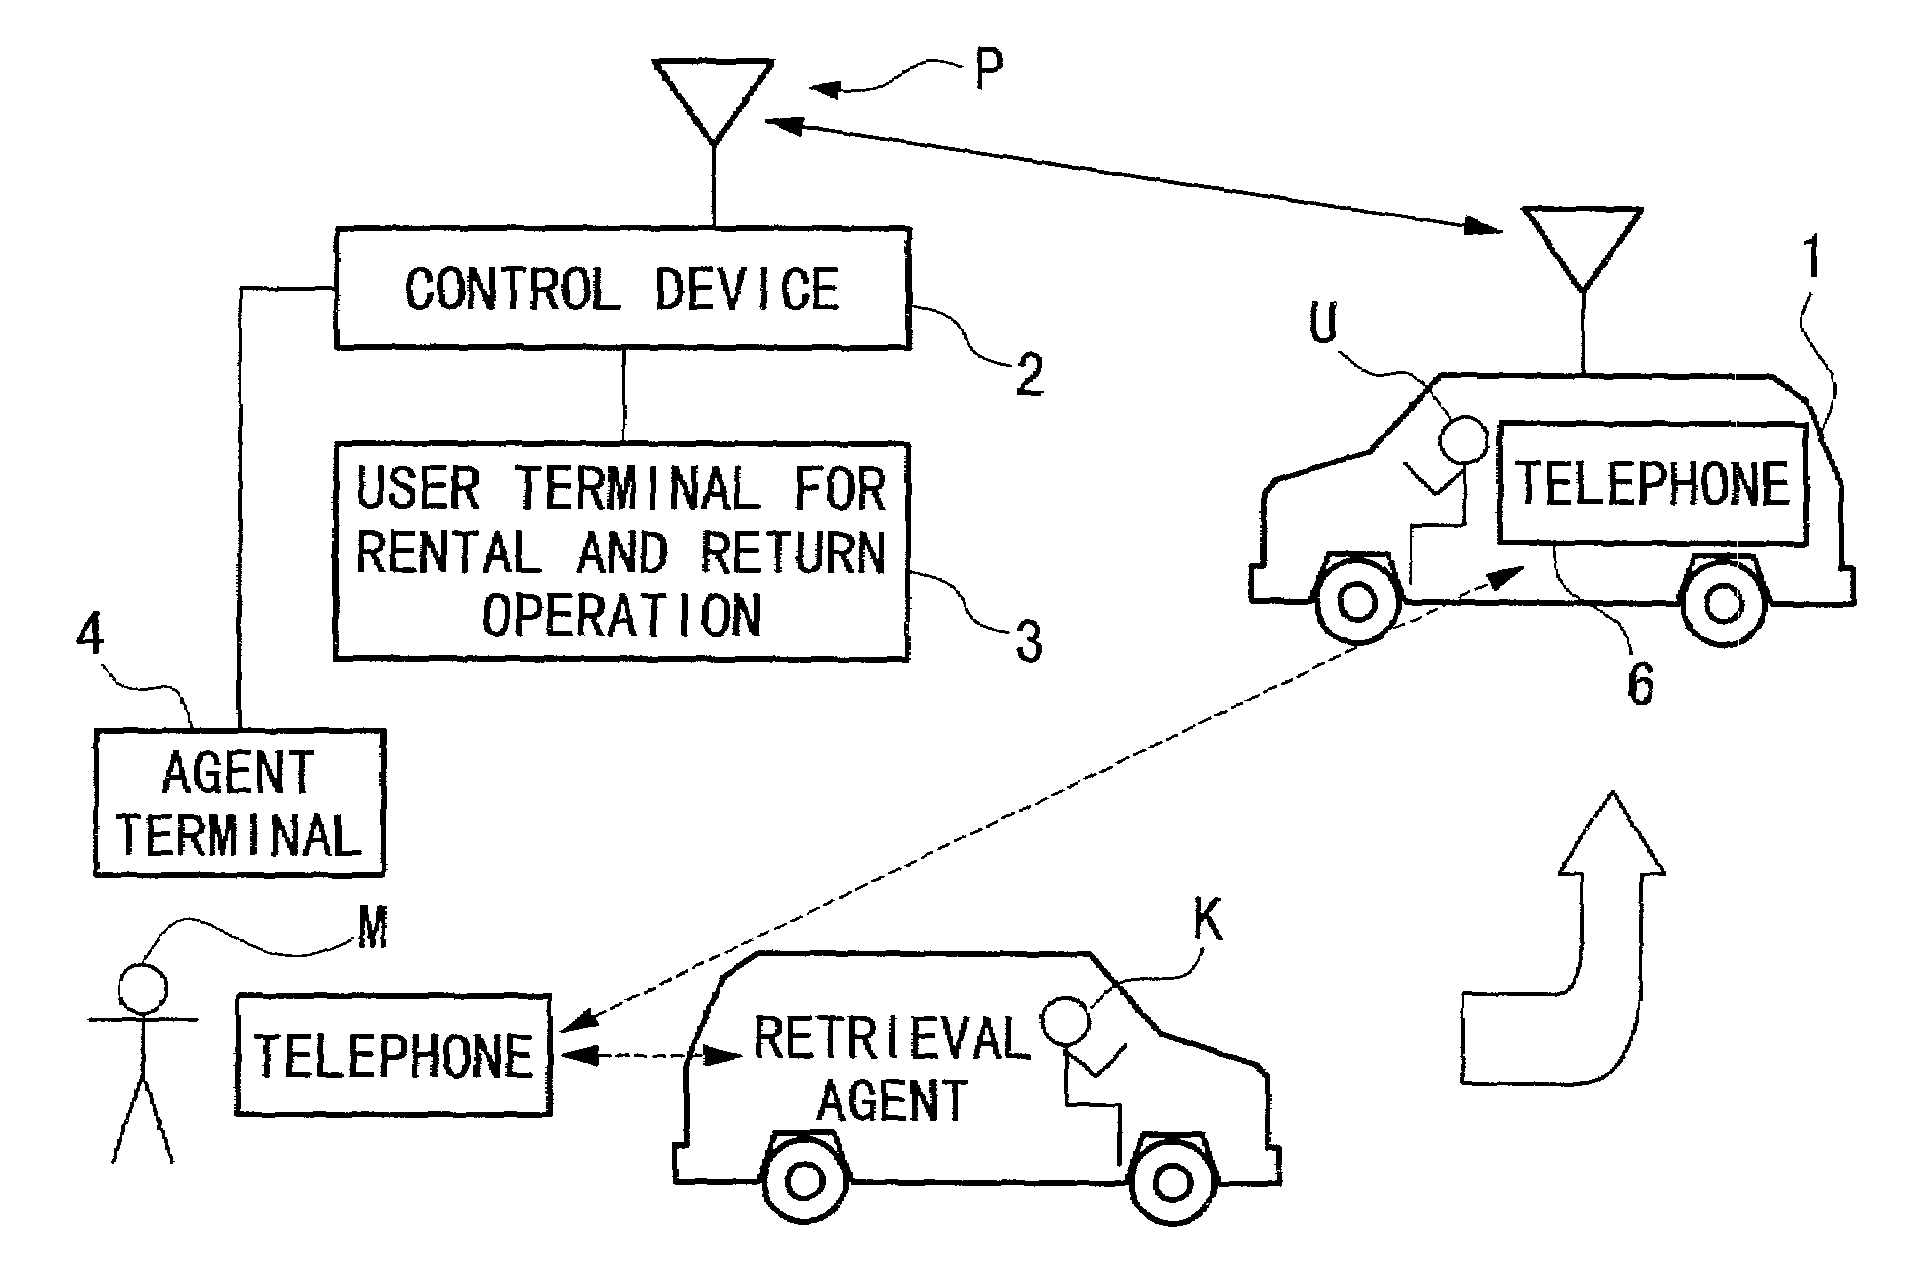 Vehicle and system for controlling return and retrieval of the same